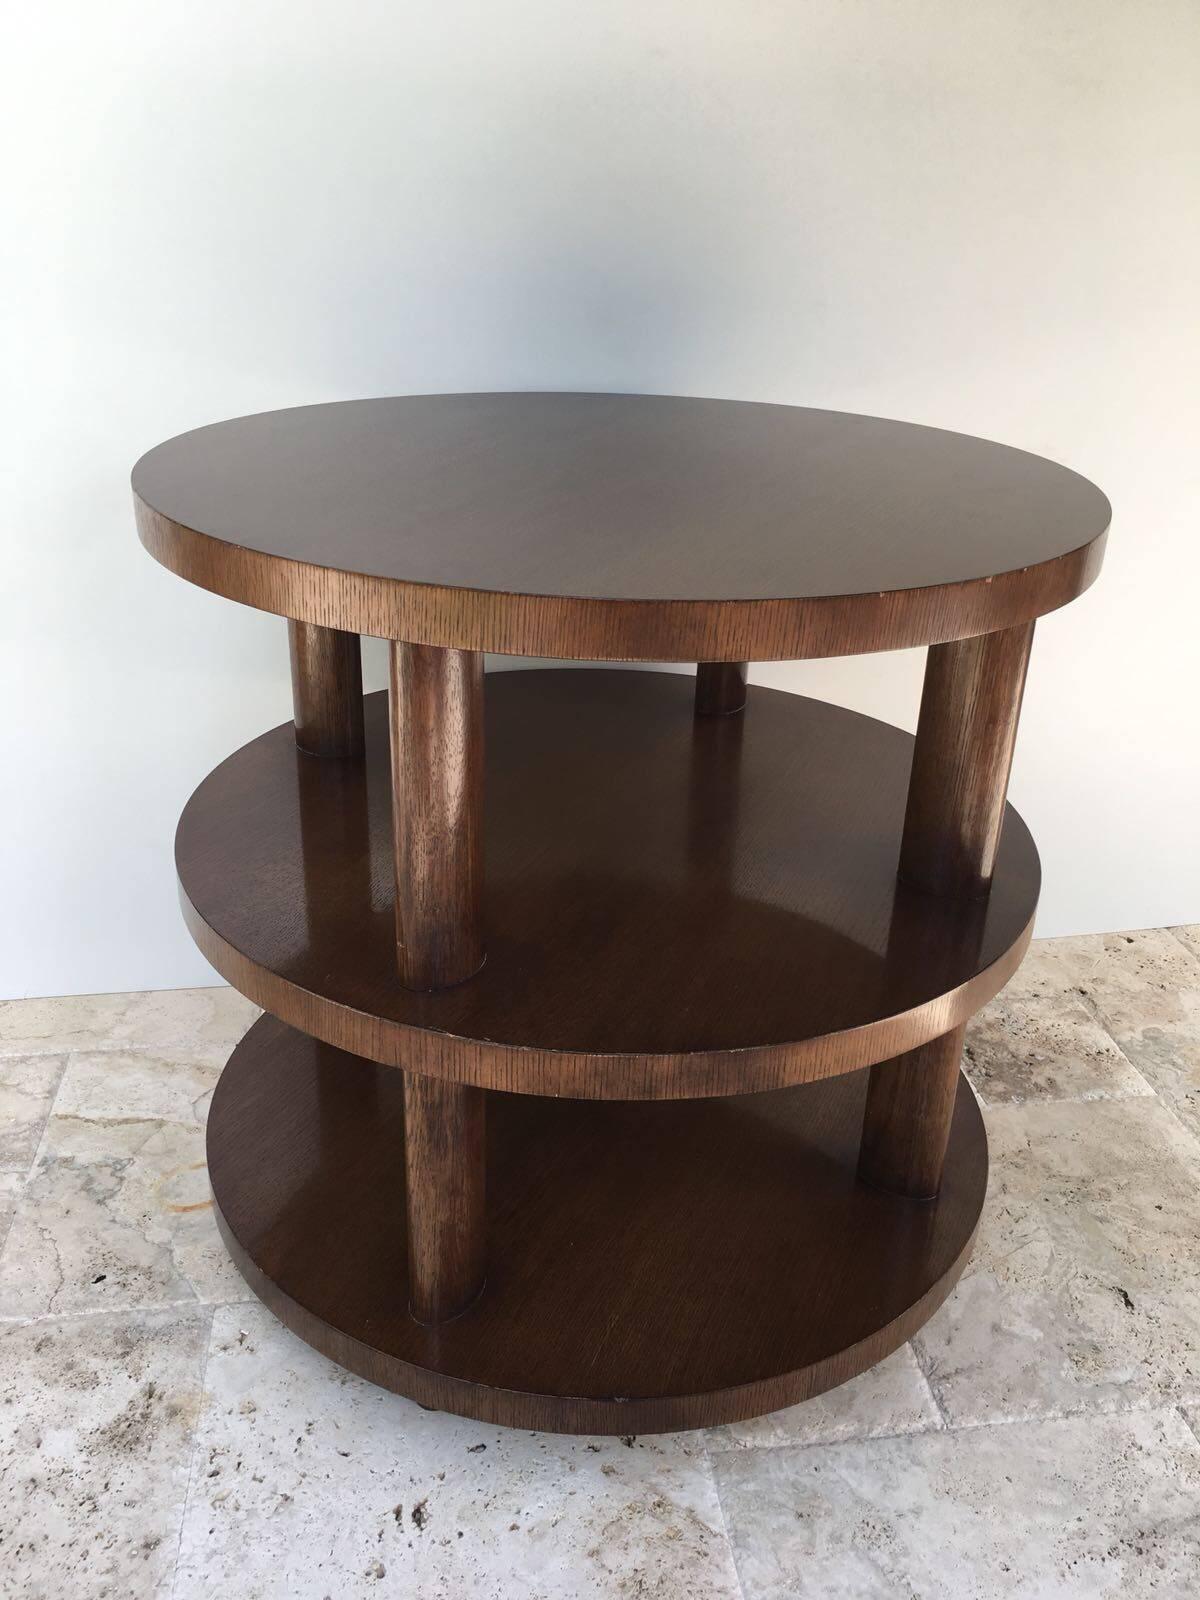 Barbara Barry Occasional Table for Baker (Art déco)